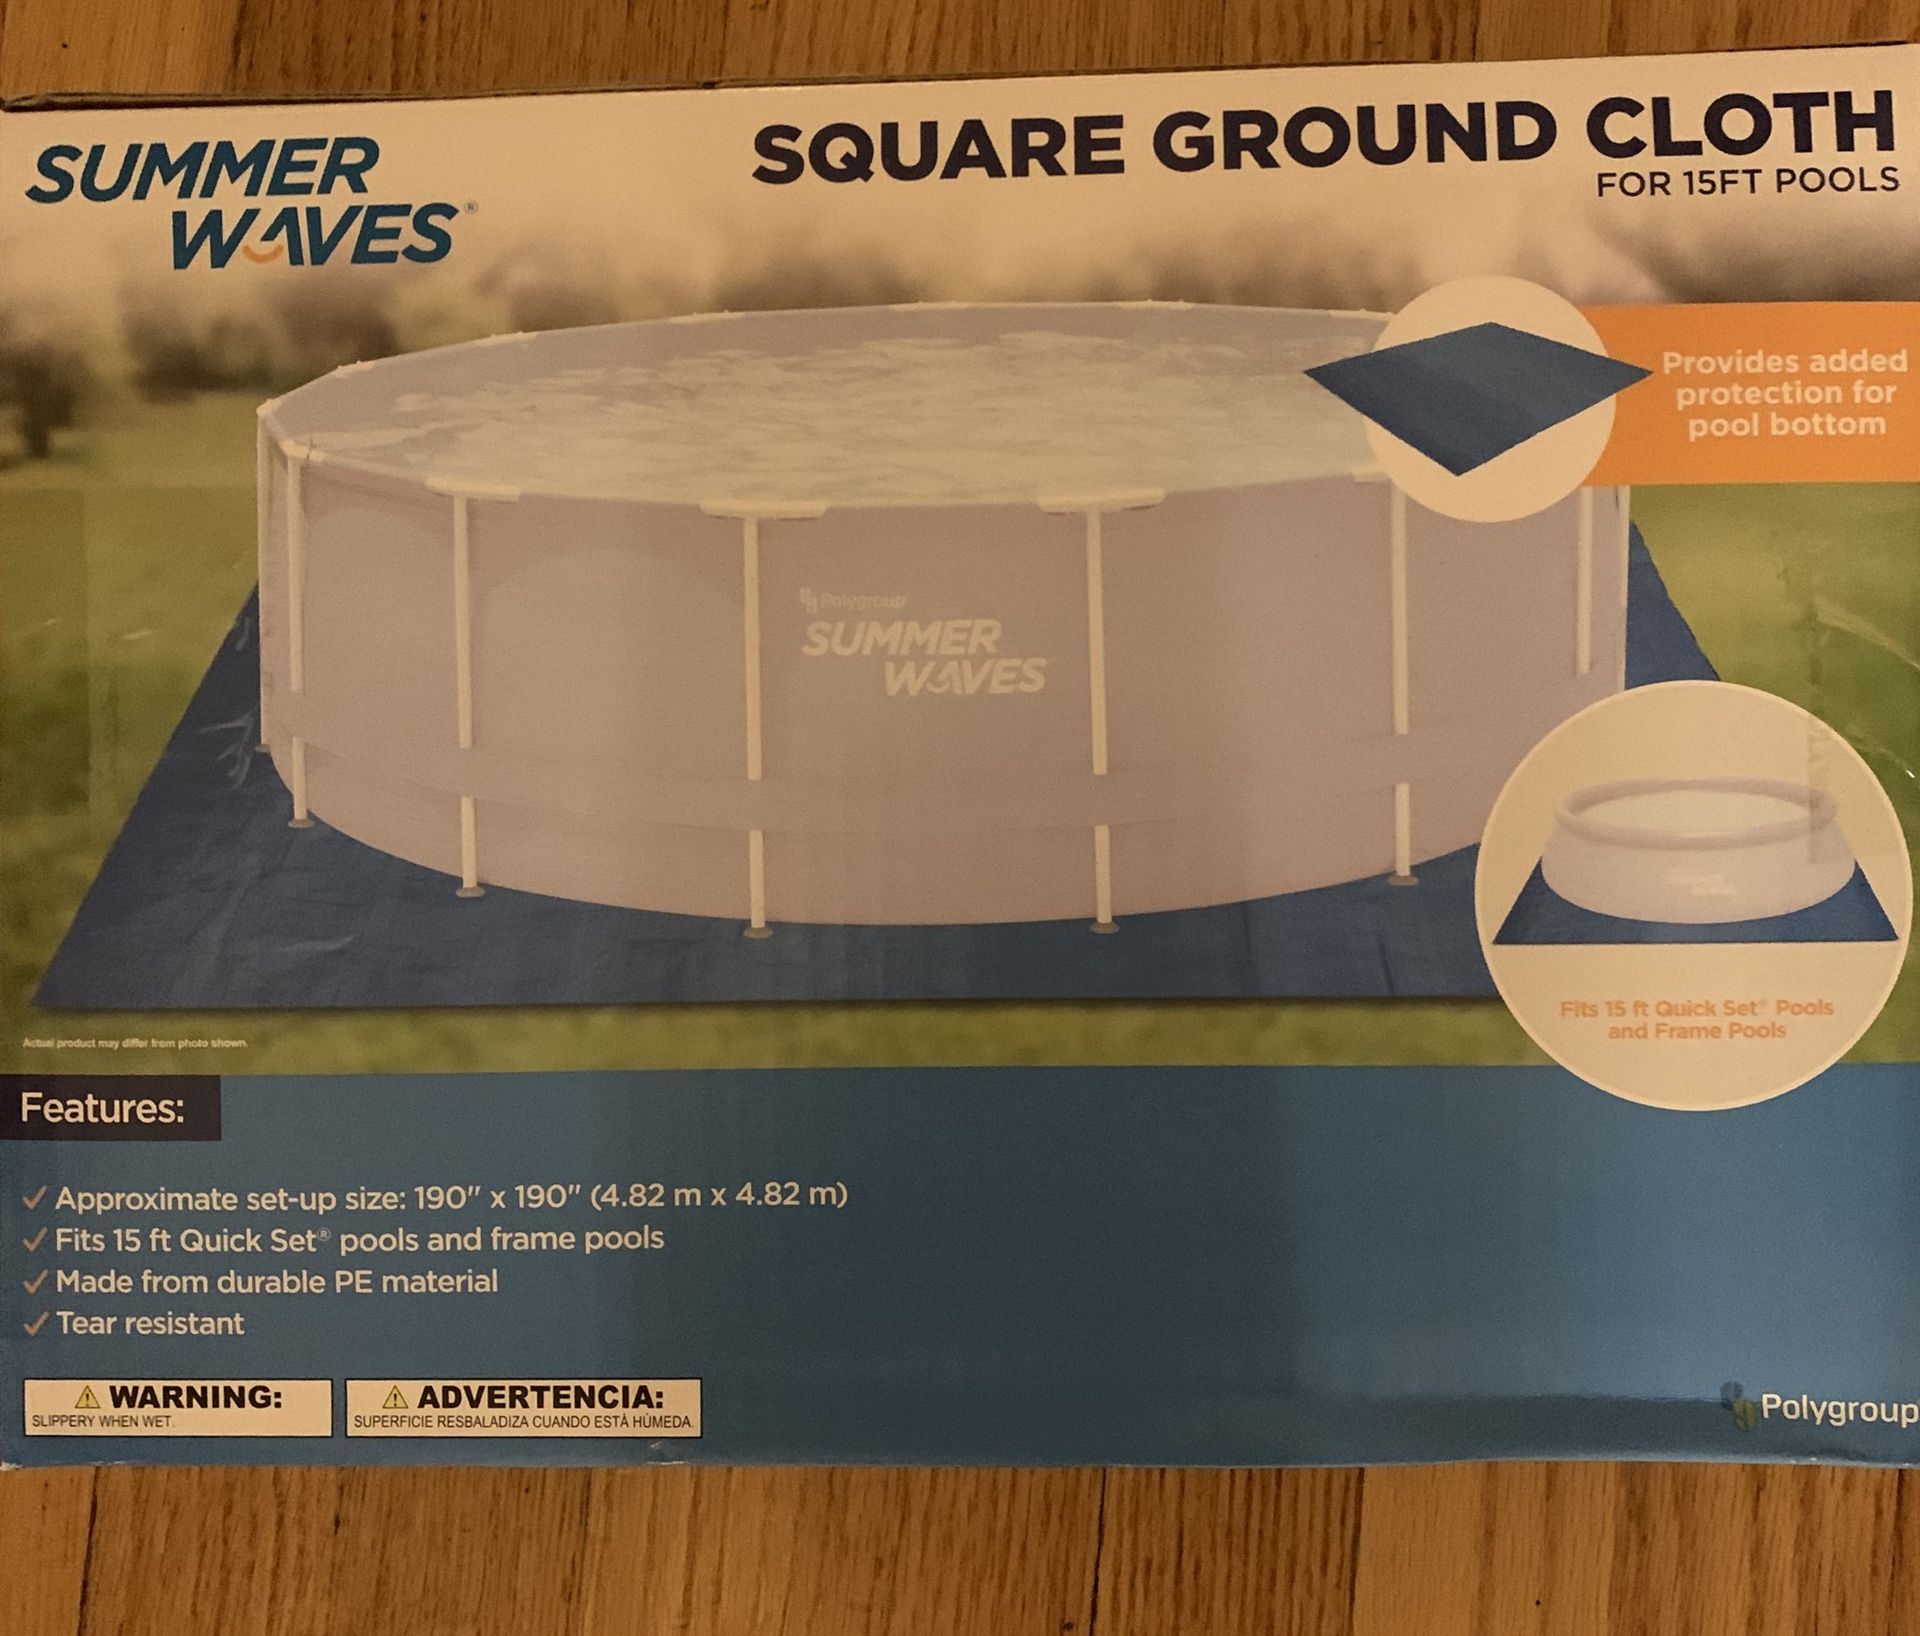 Summer Waves Square Ground Cloth for 15 Ft Pools